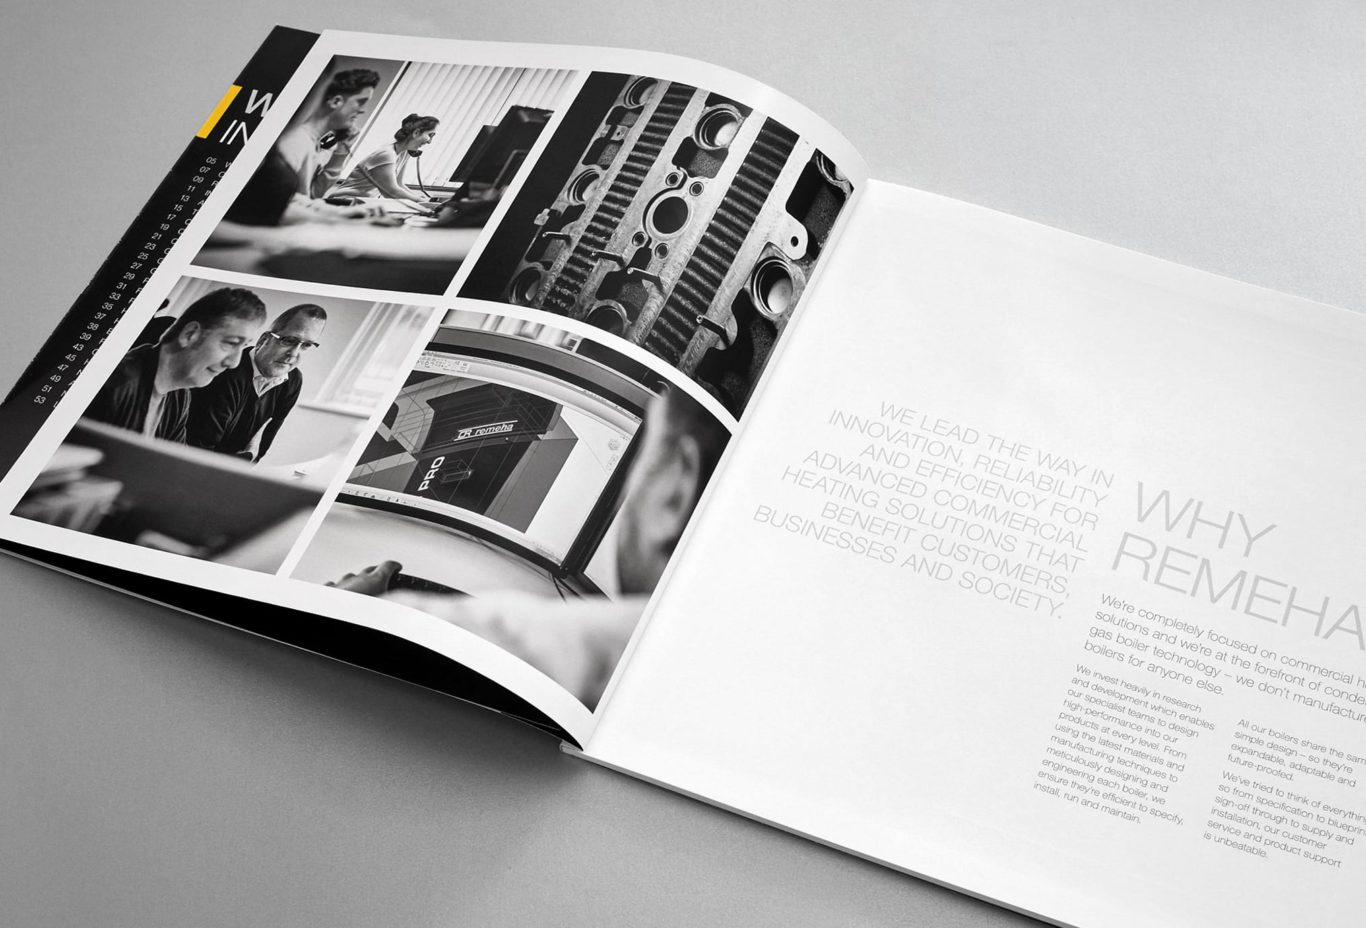 Remeha rebrand - brochure showing brand photography